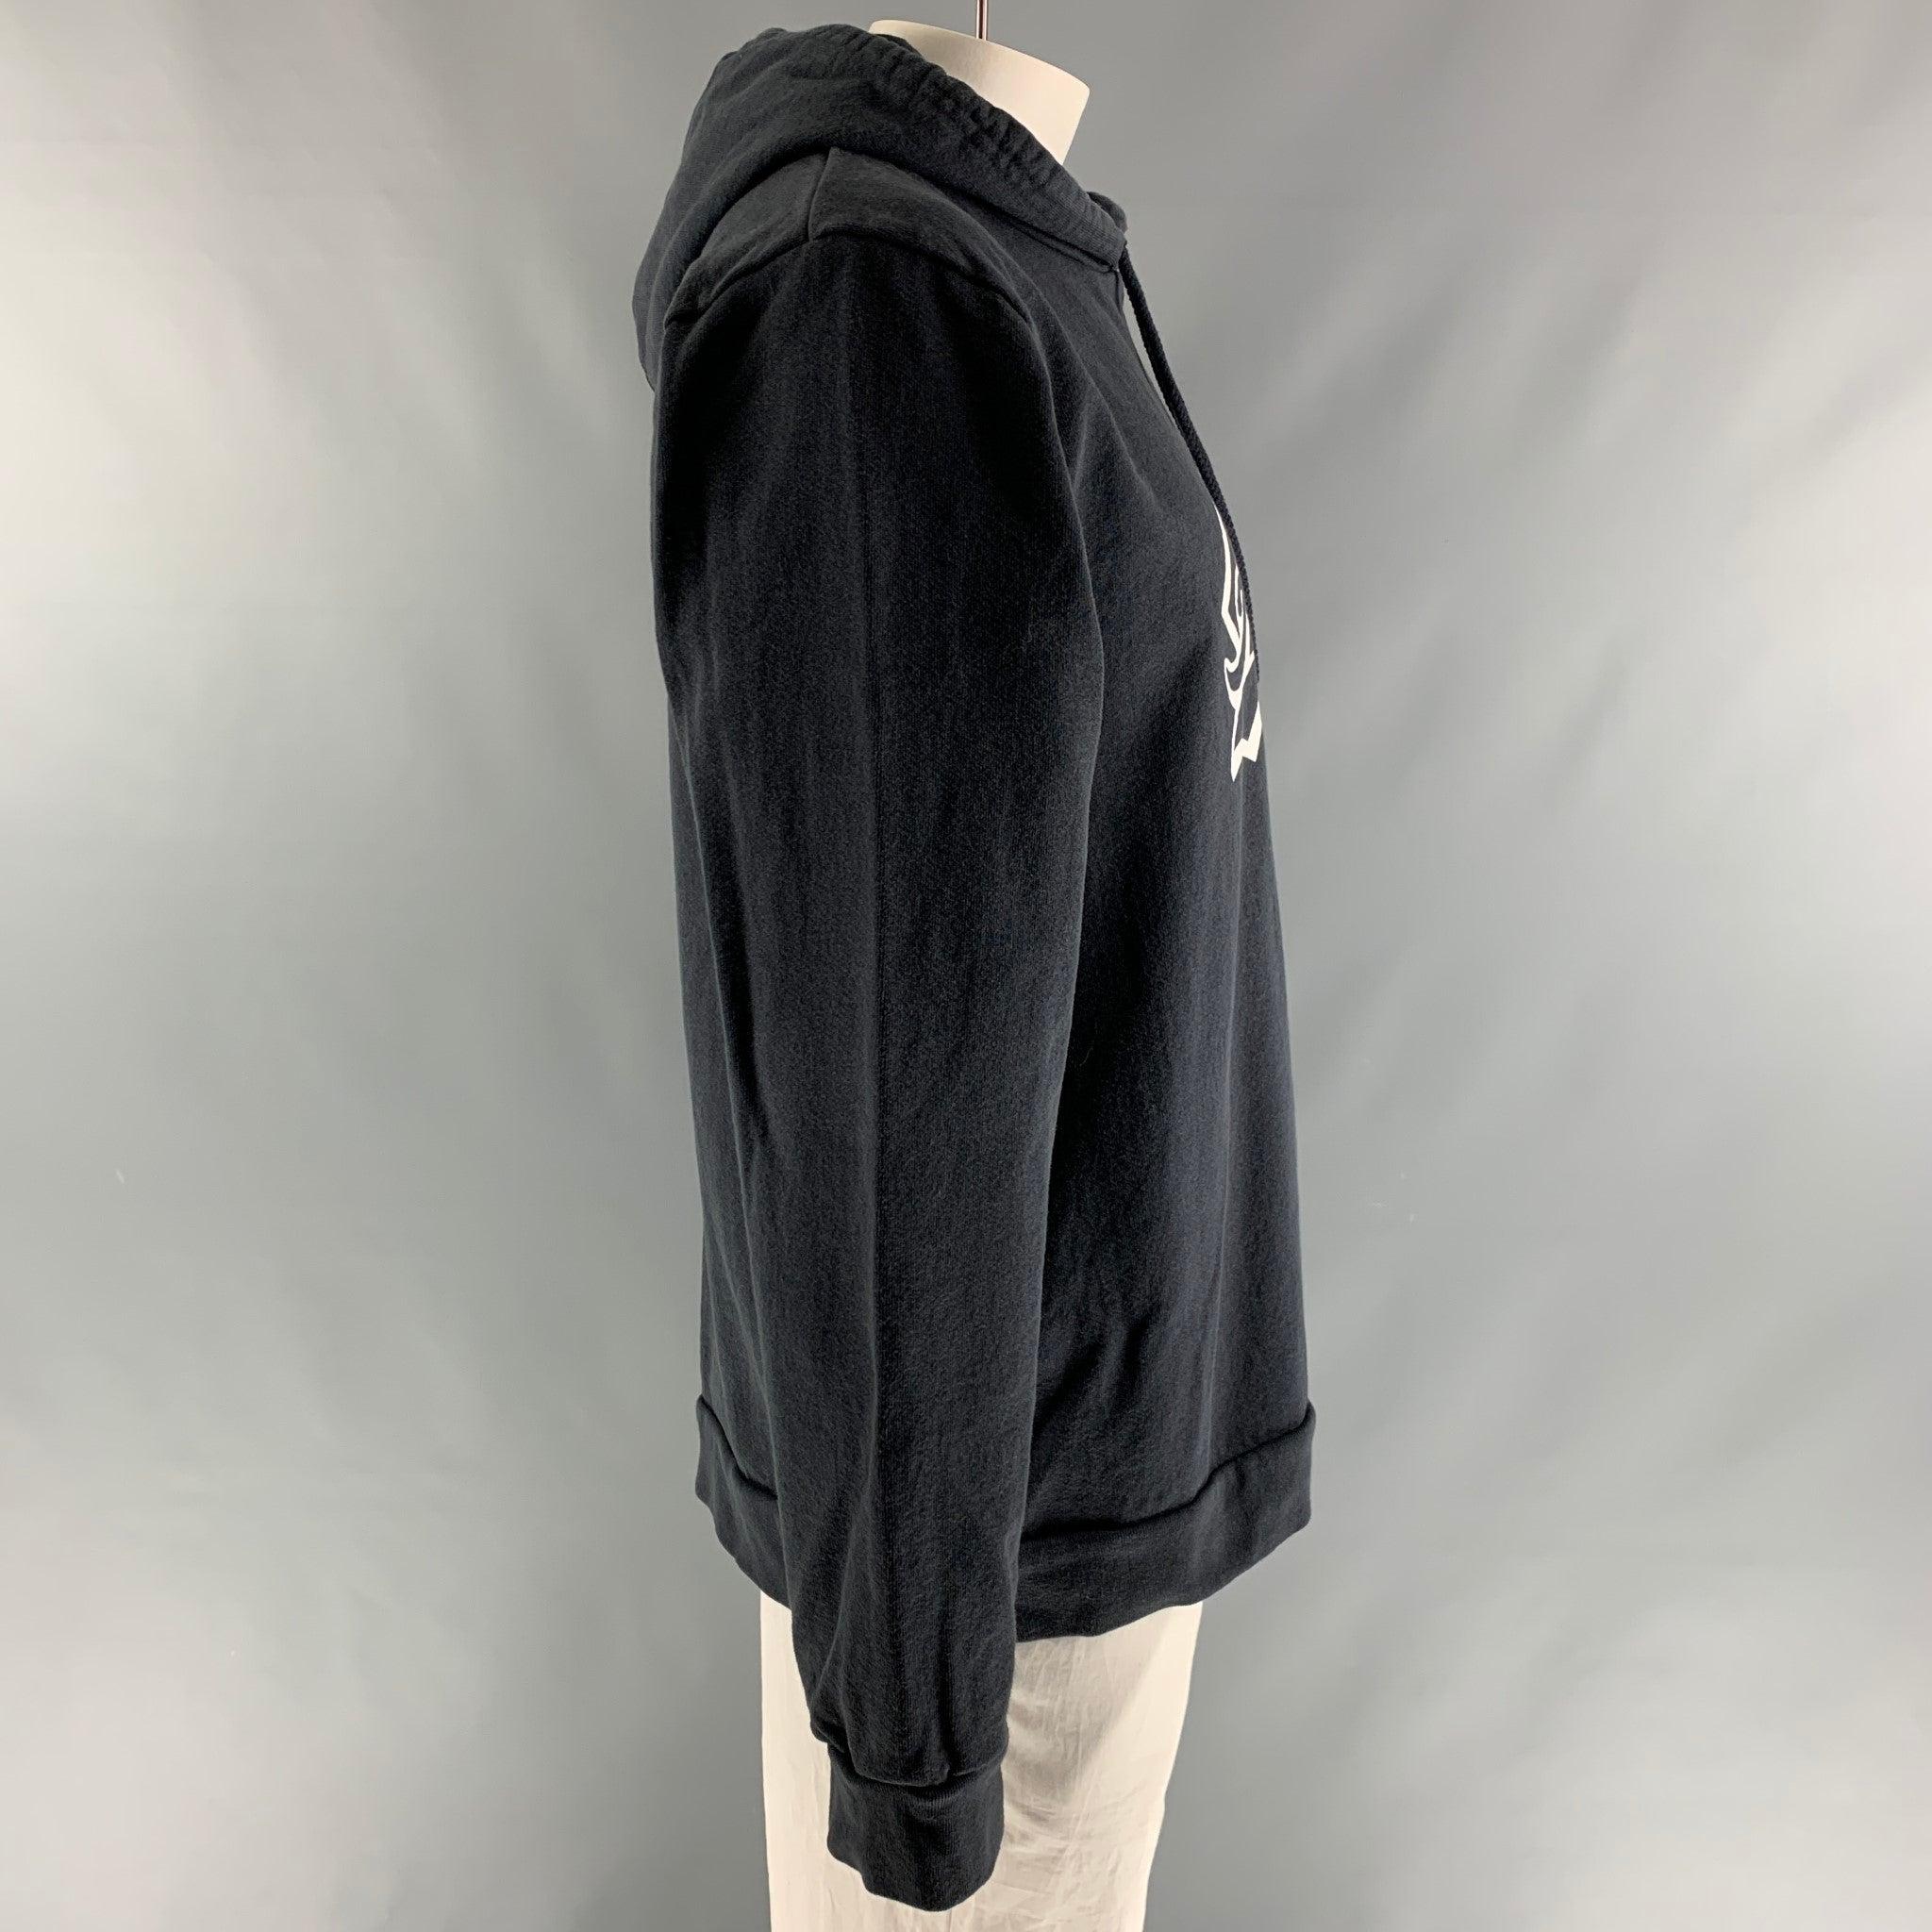 APC long sleeve hoodie sweatshirt comes in charcoal cotton/polyester french terry with a white graphic print logo at center front. Made in
USA.Good Pre-Owned Condition. Moderate signs of being worn. 

Marked:   XXL 

Measurements: 
 
Shoulder: 21